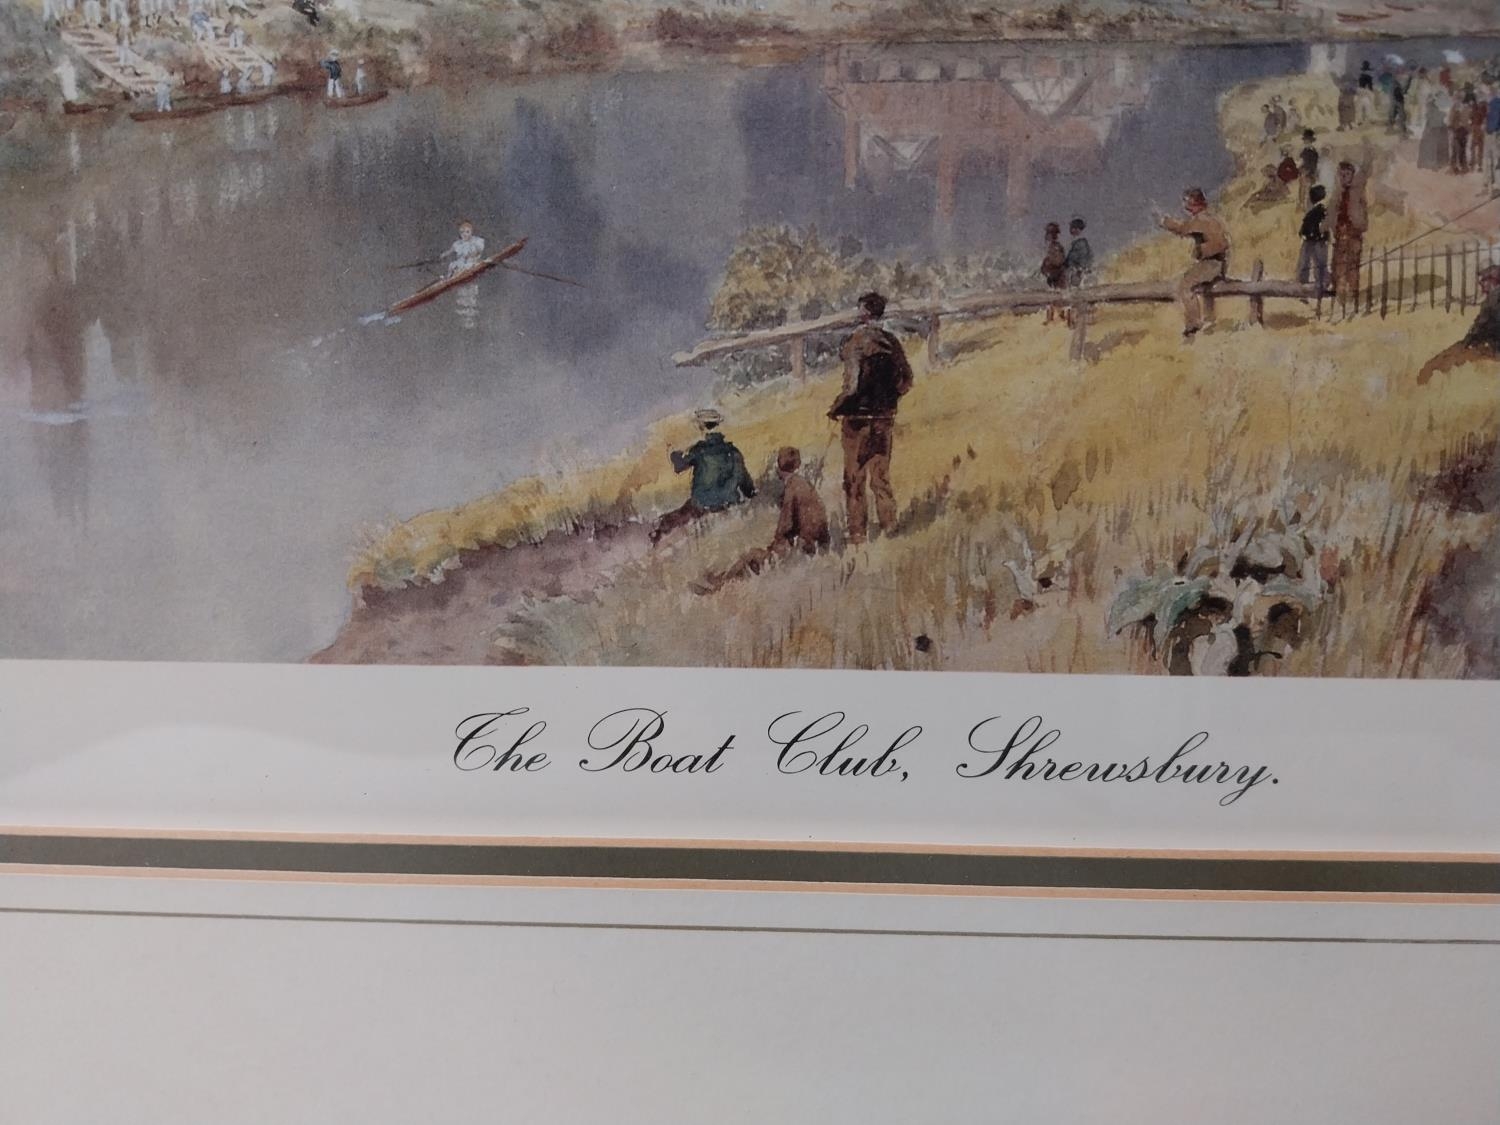 A framed and glazed reproduction of The Boat Club Shrewsbury, H. B. Winbush, numbered in the margin. - Image 5 of 6